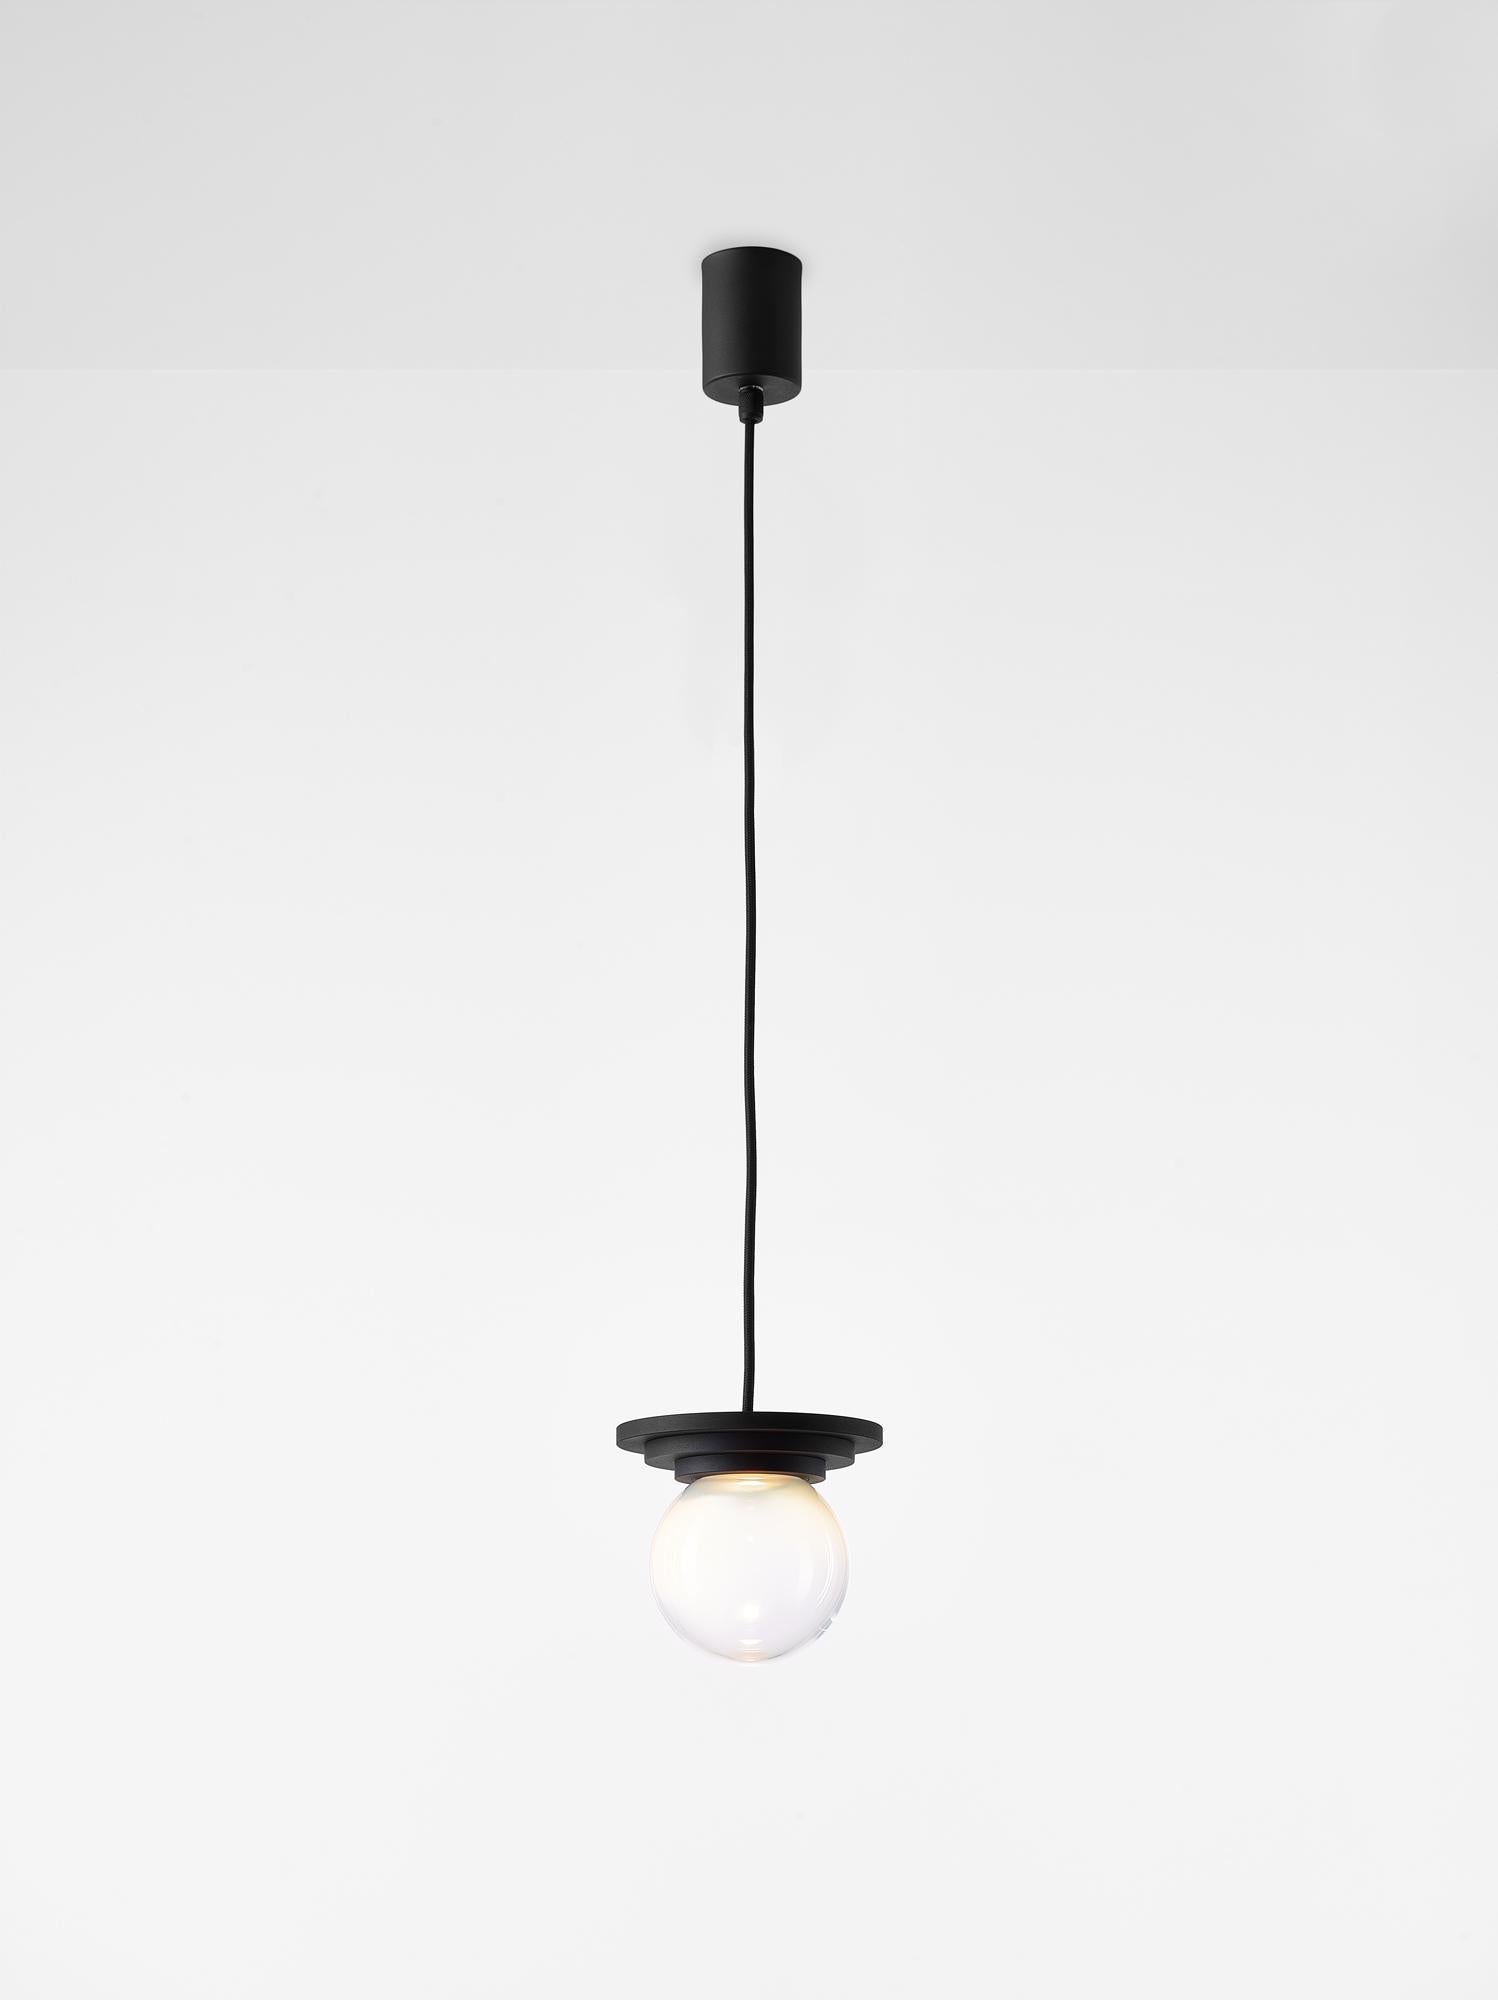 Black and Clear Stratos Mini Ball pendant light by Dechem Studio
Dimensions: D 12 x H 14 cm
Materials: Aluminum, Glass.
Also Available: Different colours available.

Different shapes of capsules and spheres contrast with anodized alloy